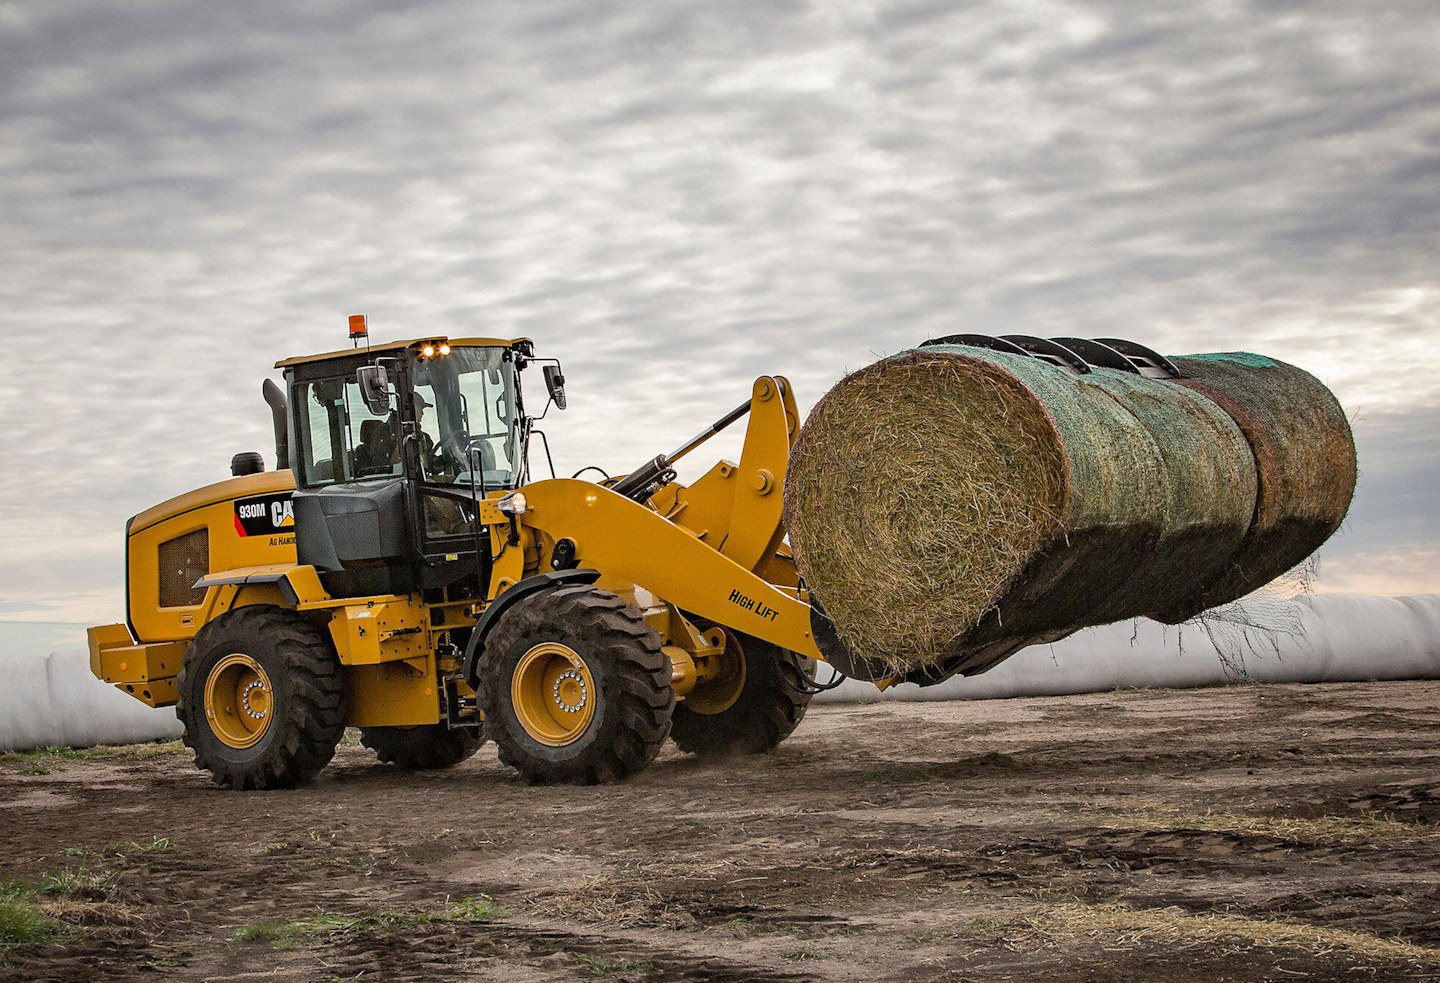 Cat Upgrades M Series Small Wheel Loaders With Payload Management Intros 930m Ag Handler Equipment World